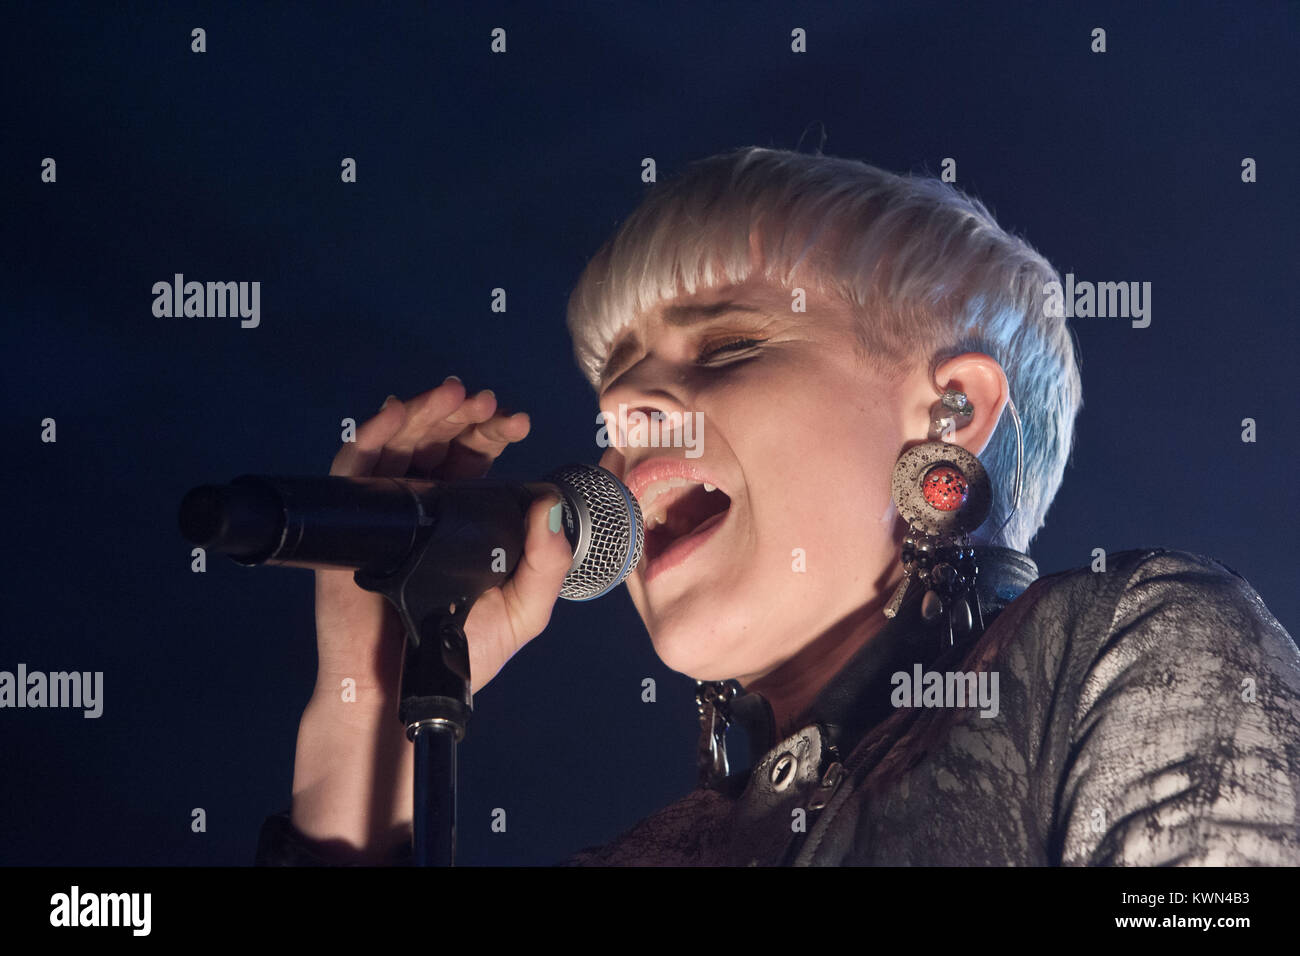 The Swedish singer Robyn (Miriam Carlsson) performs live concert at TAP1 in Copenhagen and is here pictured live on stage during her show. Denmark 19/03 2011. Stock Photo